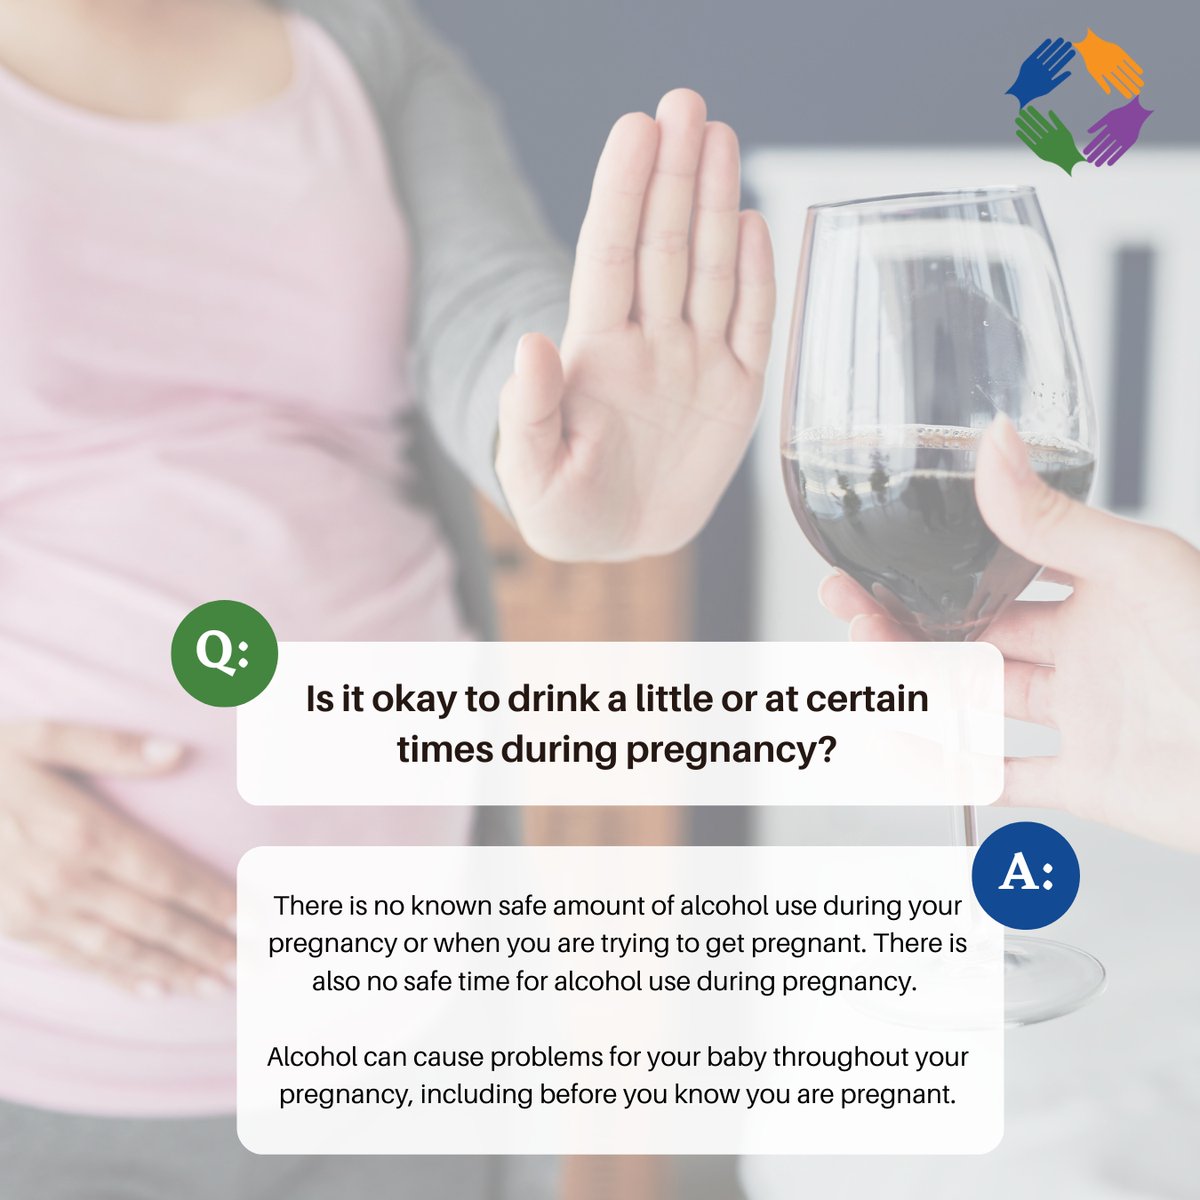 Women & Alcohol Use During Pregnancy Q&A 🤰

FASDs are preventable if a baby is not exposed to alcohol before birth!

Source (CDC, 2022) 🌐: cdc.gov/ncbddd/fasd/al…

#Alcohol #Pregnancy #FASD #PreventFASD #FASDAwareness #MomLife #WednesdayWisdom